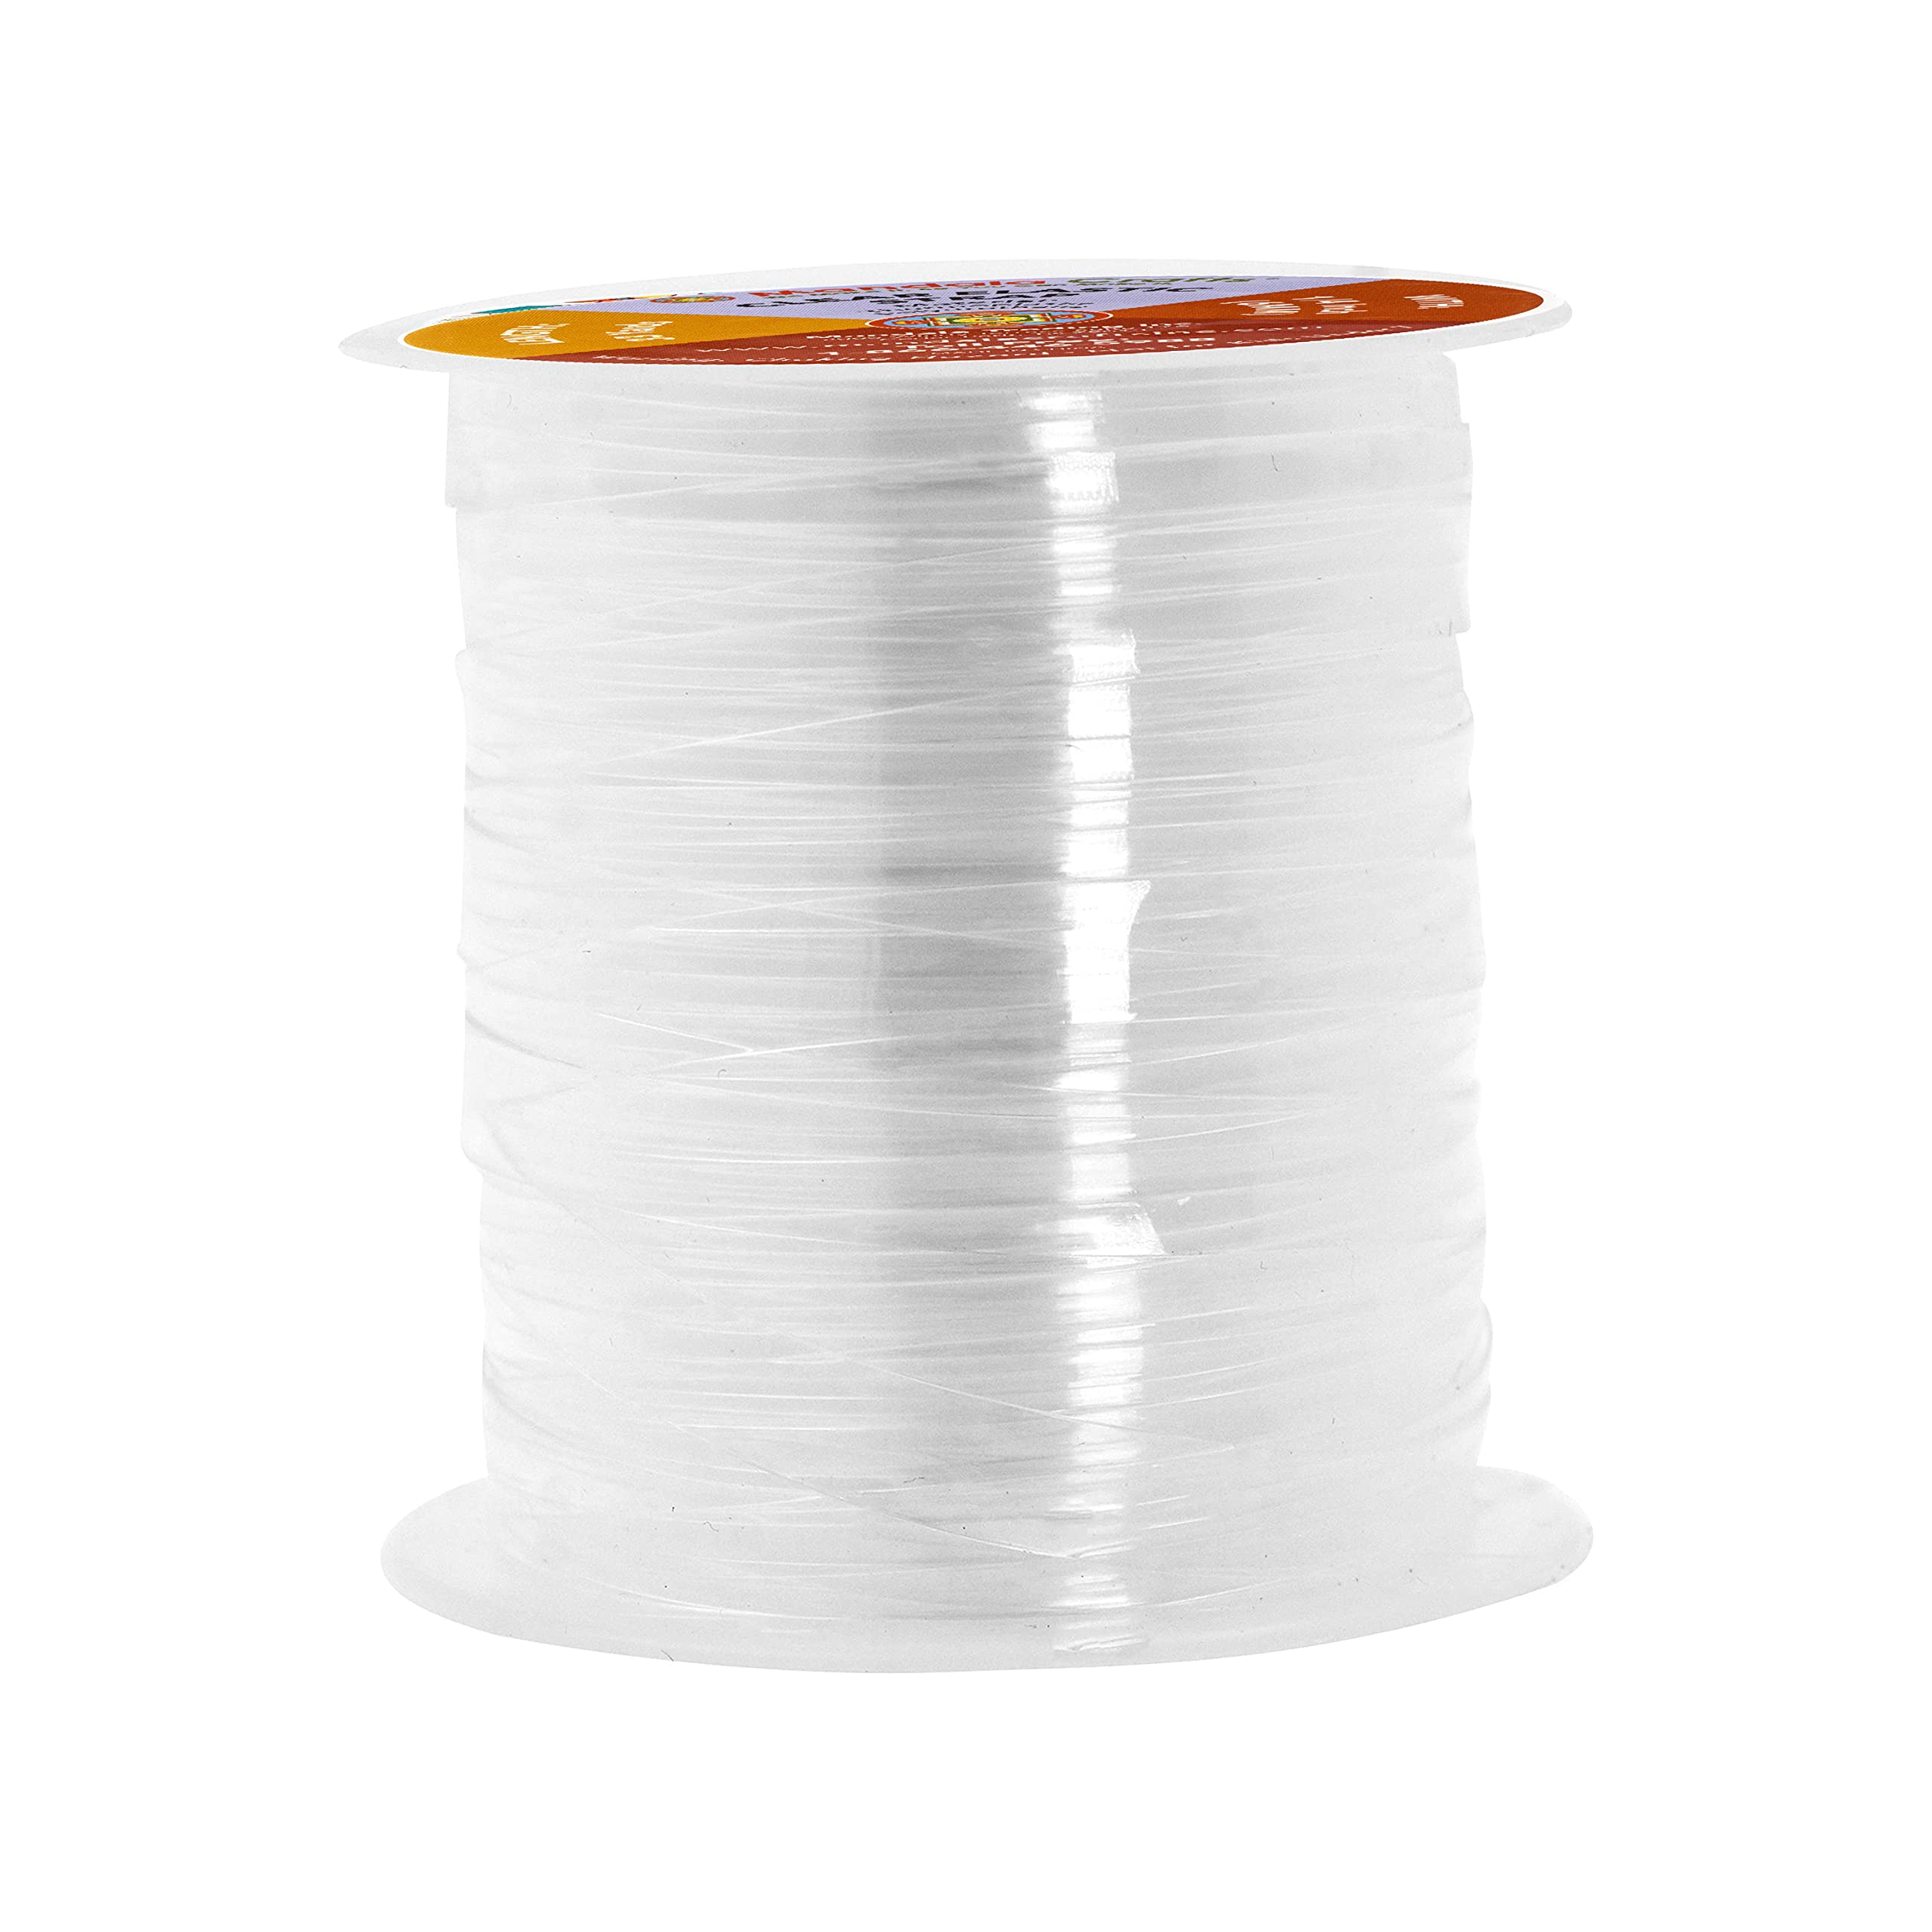 Mandala Crafts 1/4 Inch Lightweight Clear Elastic for Sewing 33 YDs  Invisible Transparent Elastic Band Clear Elastic Strap for Bra Lingerie  Swimwear Garments 1/4 Inch 6mm 33 Yards